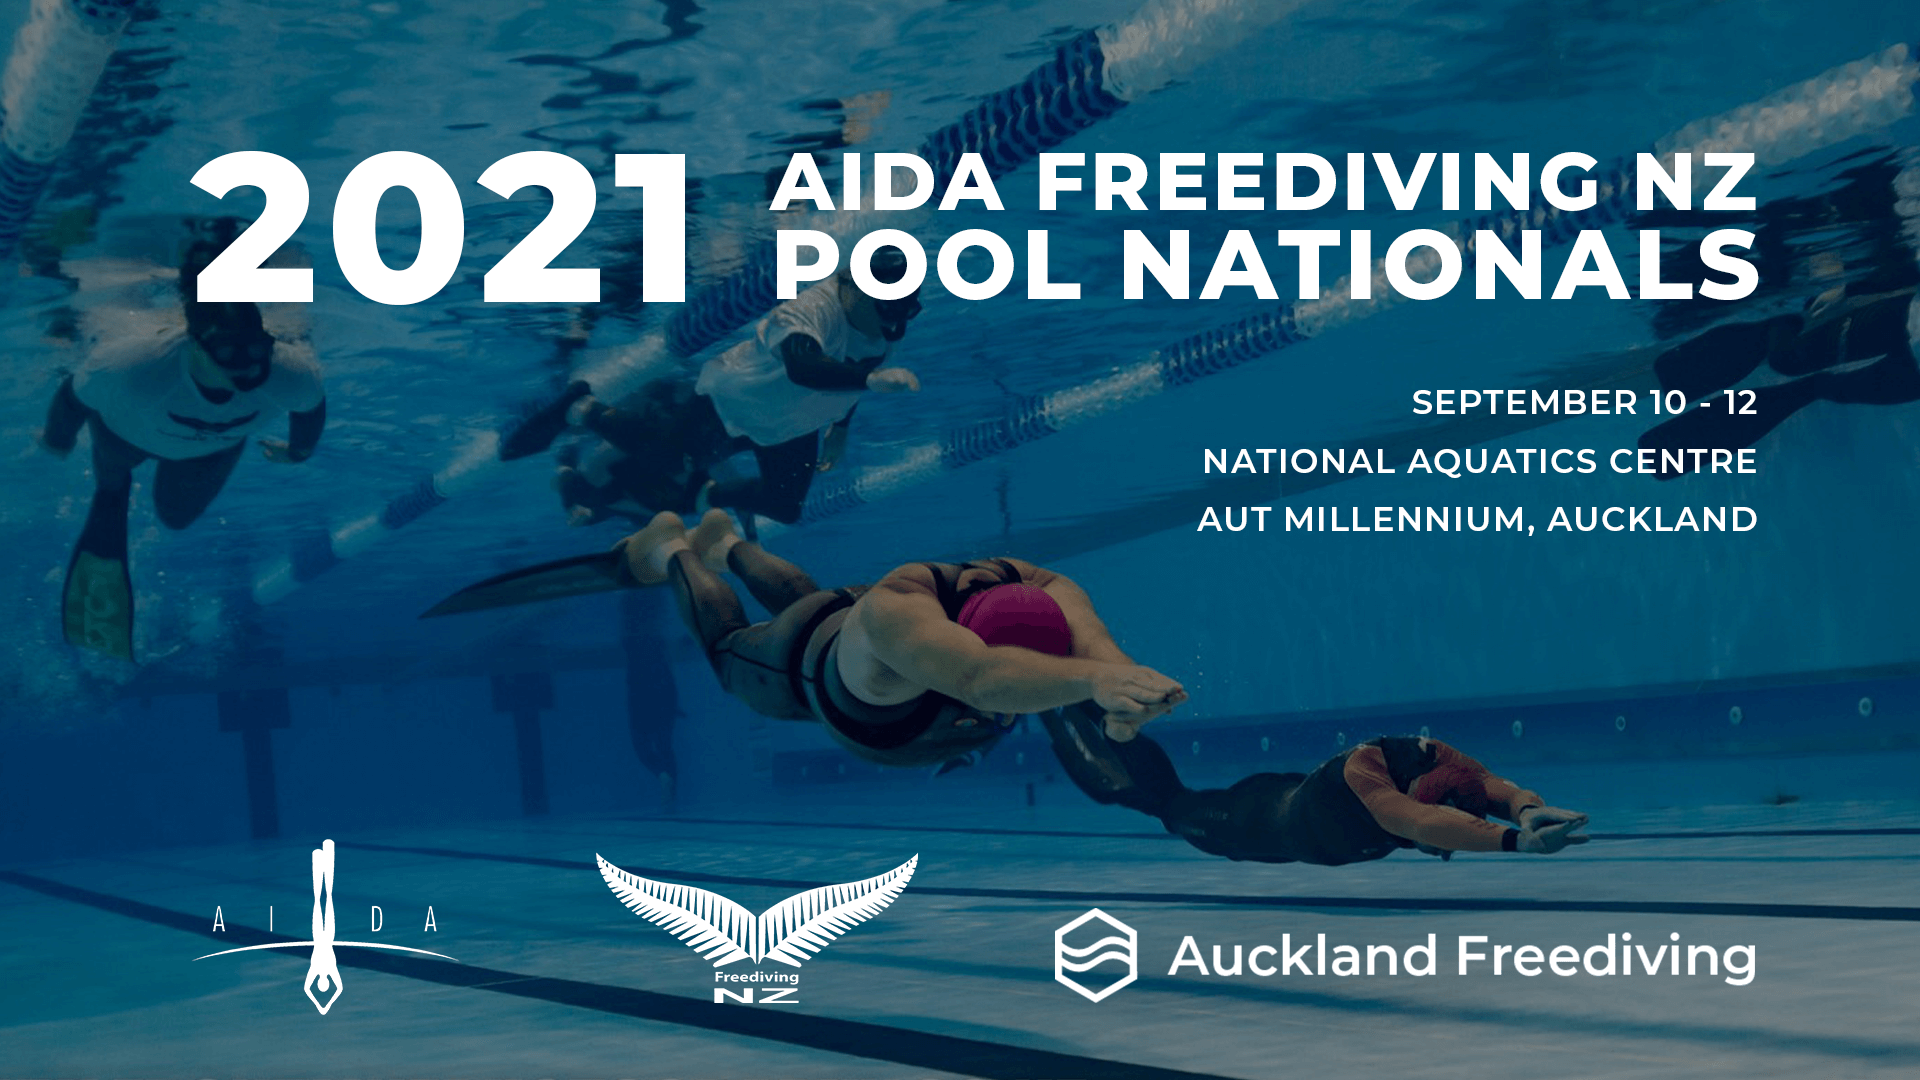 AIDA Freediving New Zealand Pool Nationals 2021 - cancelled